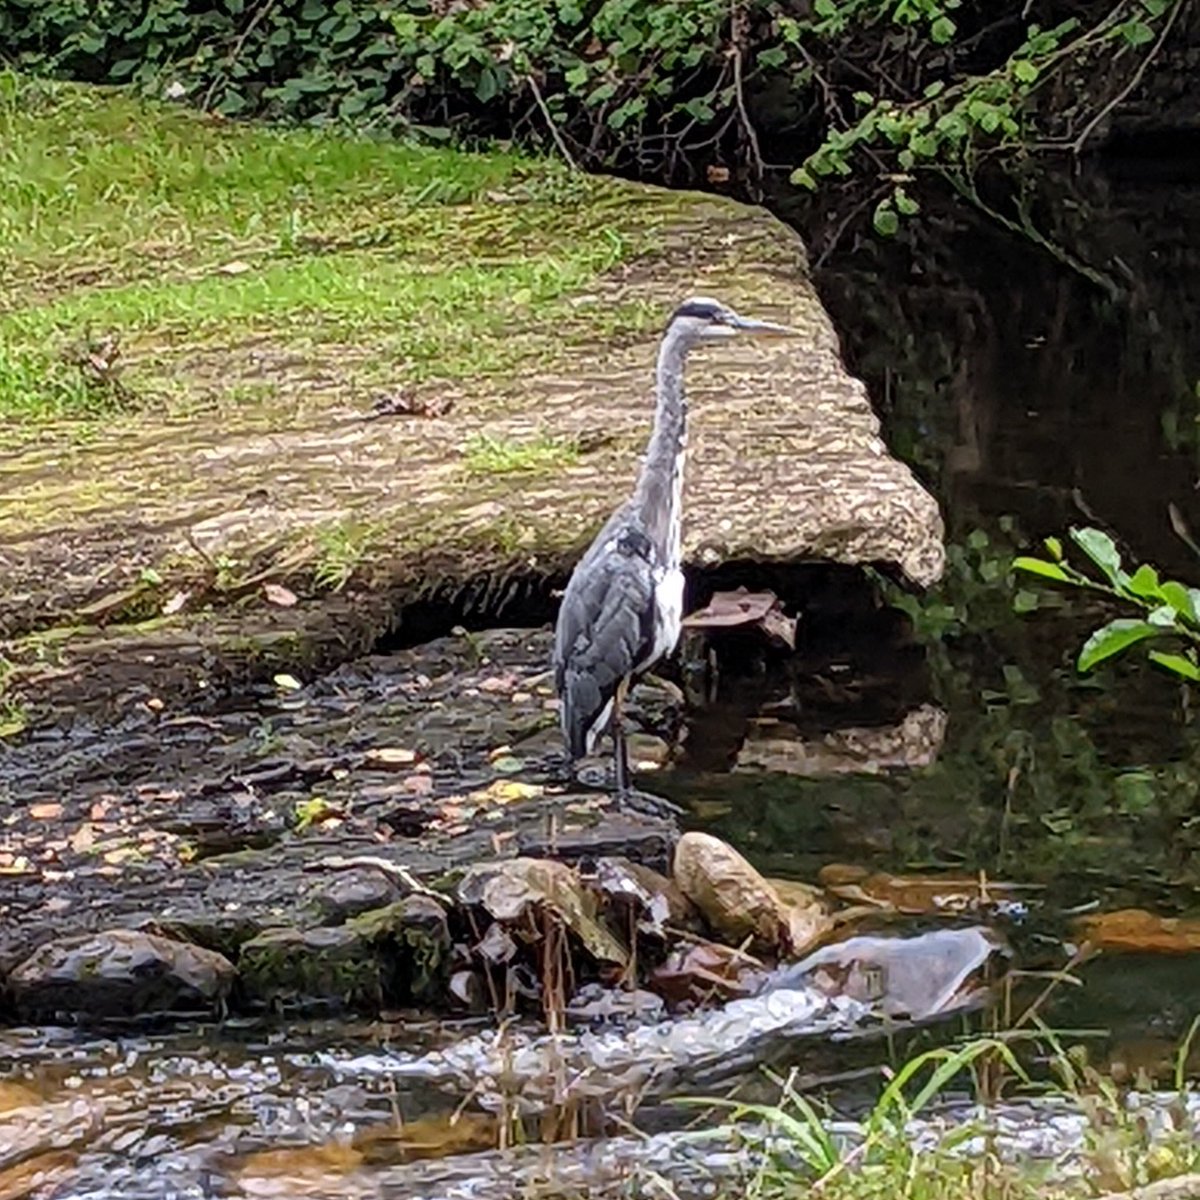 It was lovely to see this beautiful heron at the old weir at #Parke this morning.

#BoveyTracey #DevonWalks #RiverBovey #Devon @nationaltrust